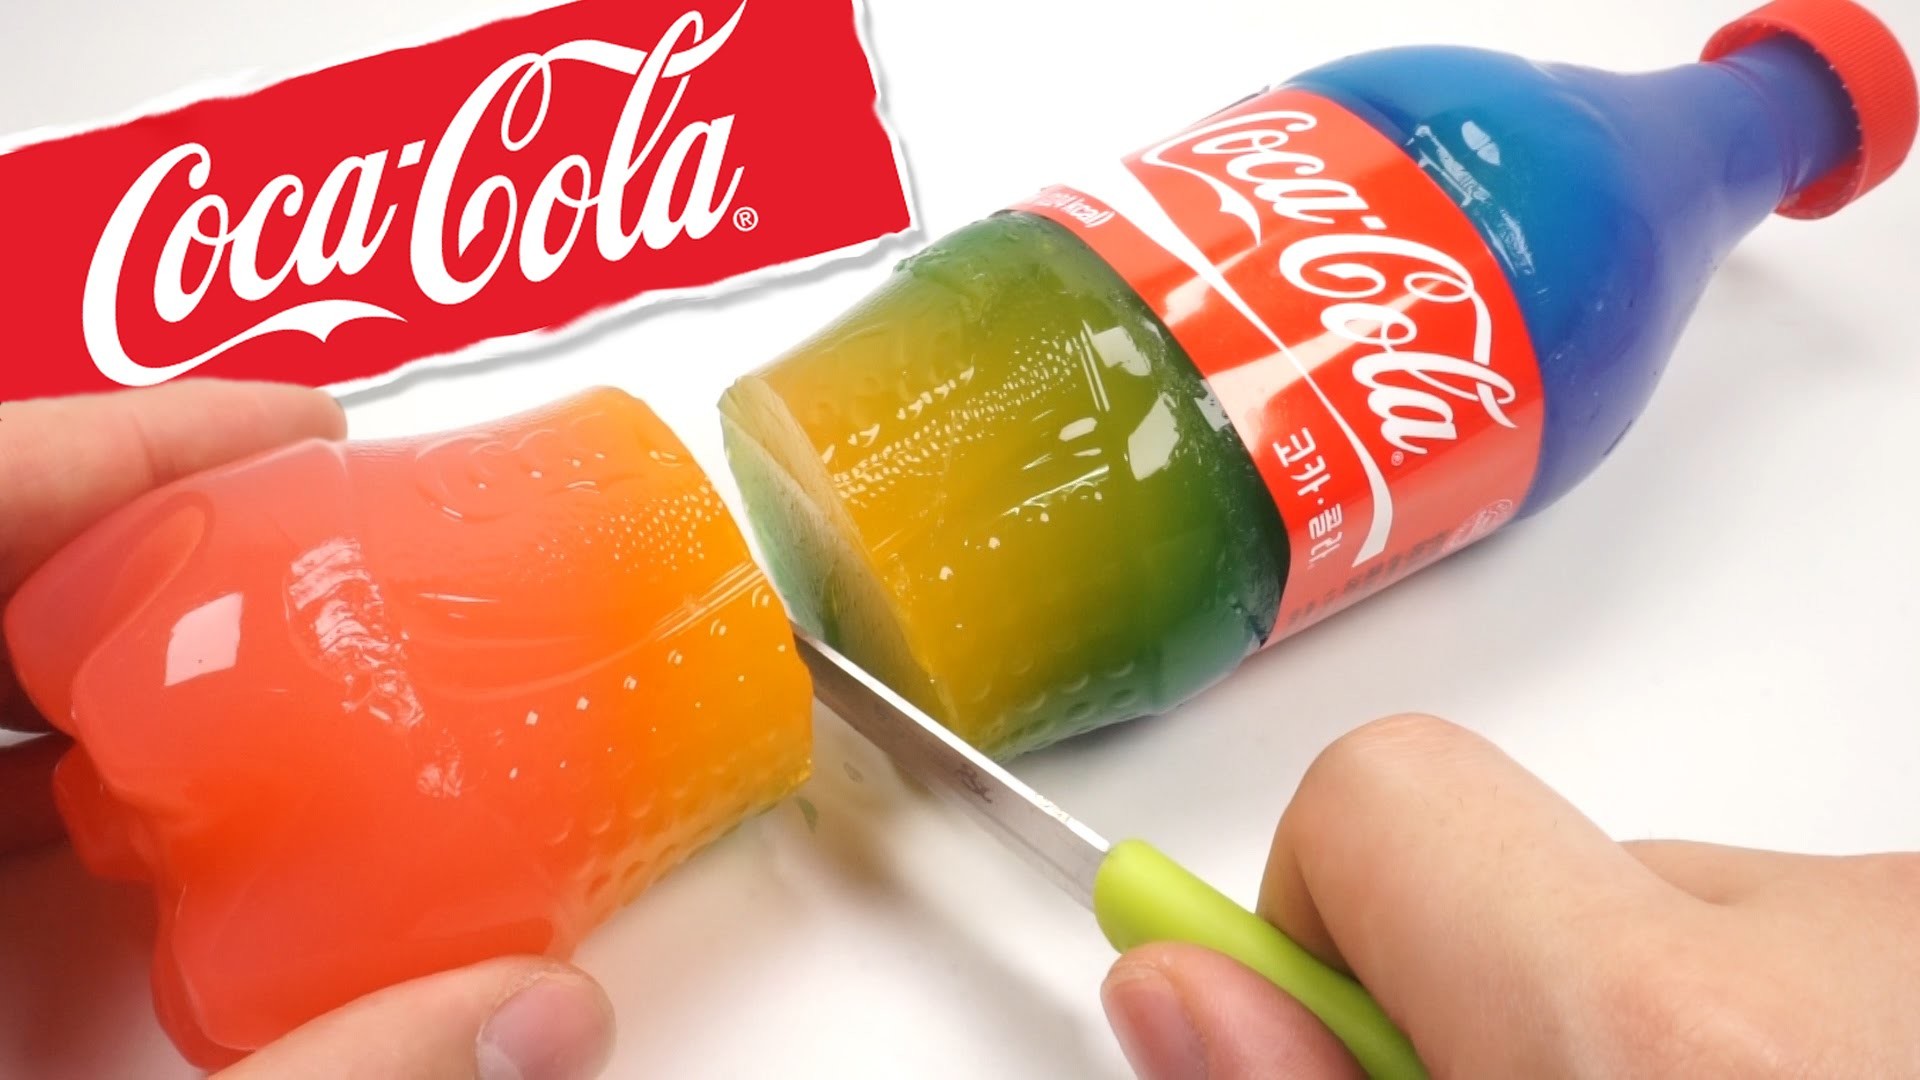 How To Make Rainbow Coca Cola Bottle Pudding Jelly DIY Cooking Surprise  Coke Jelly Recipe – YouTube